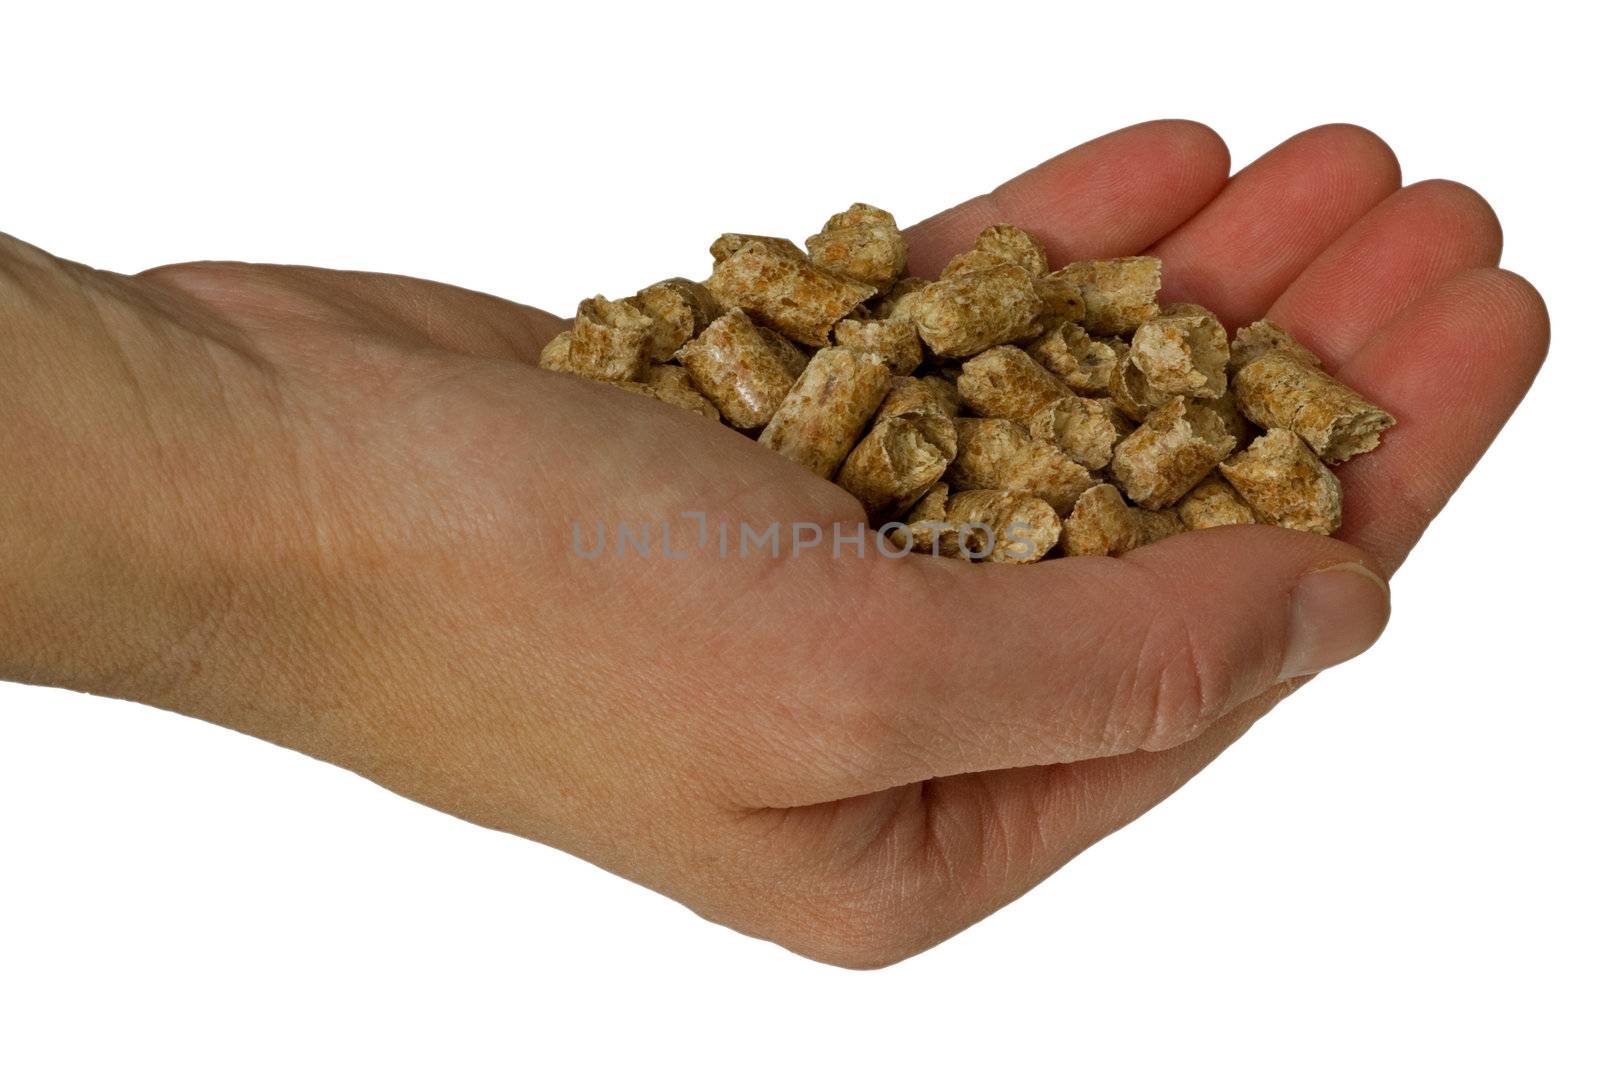 A hand holding pellets for heating, on a white isolated background